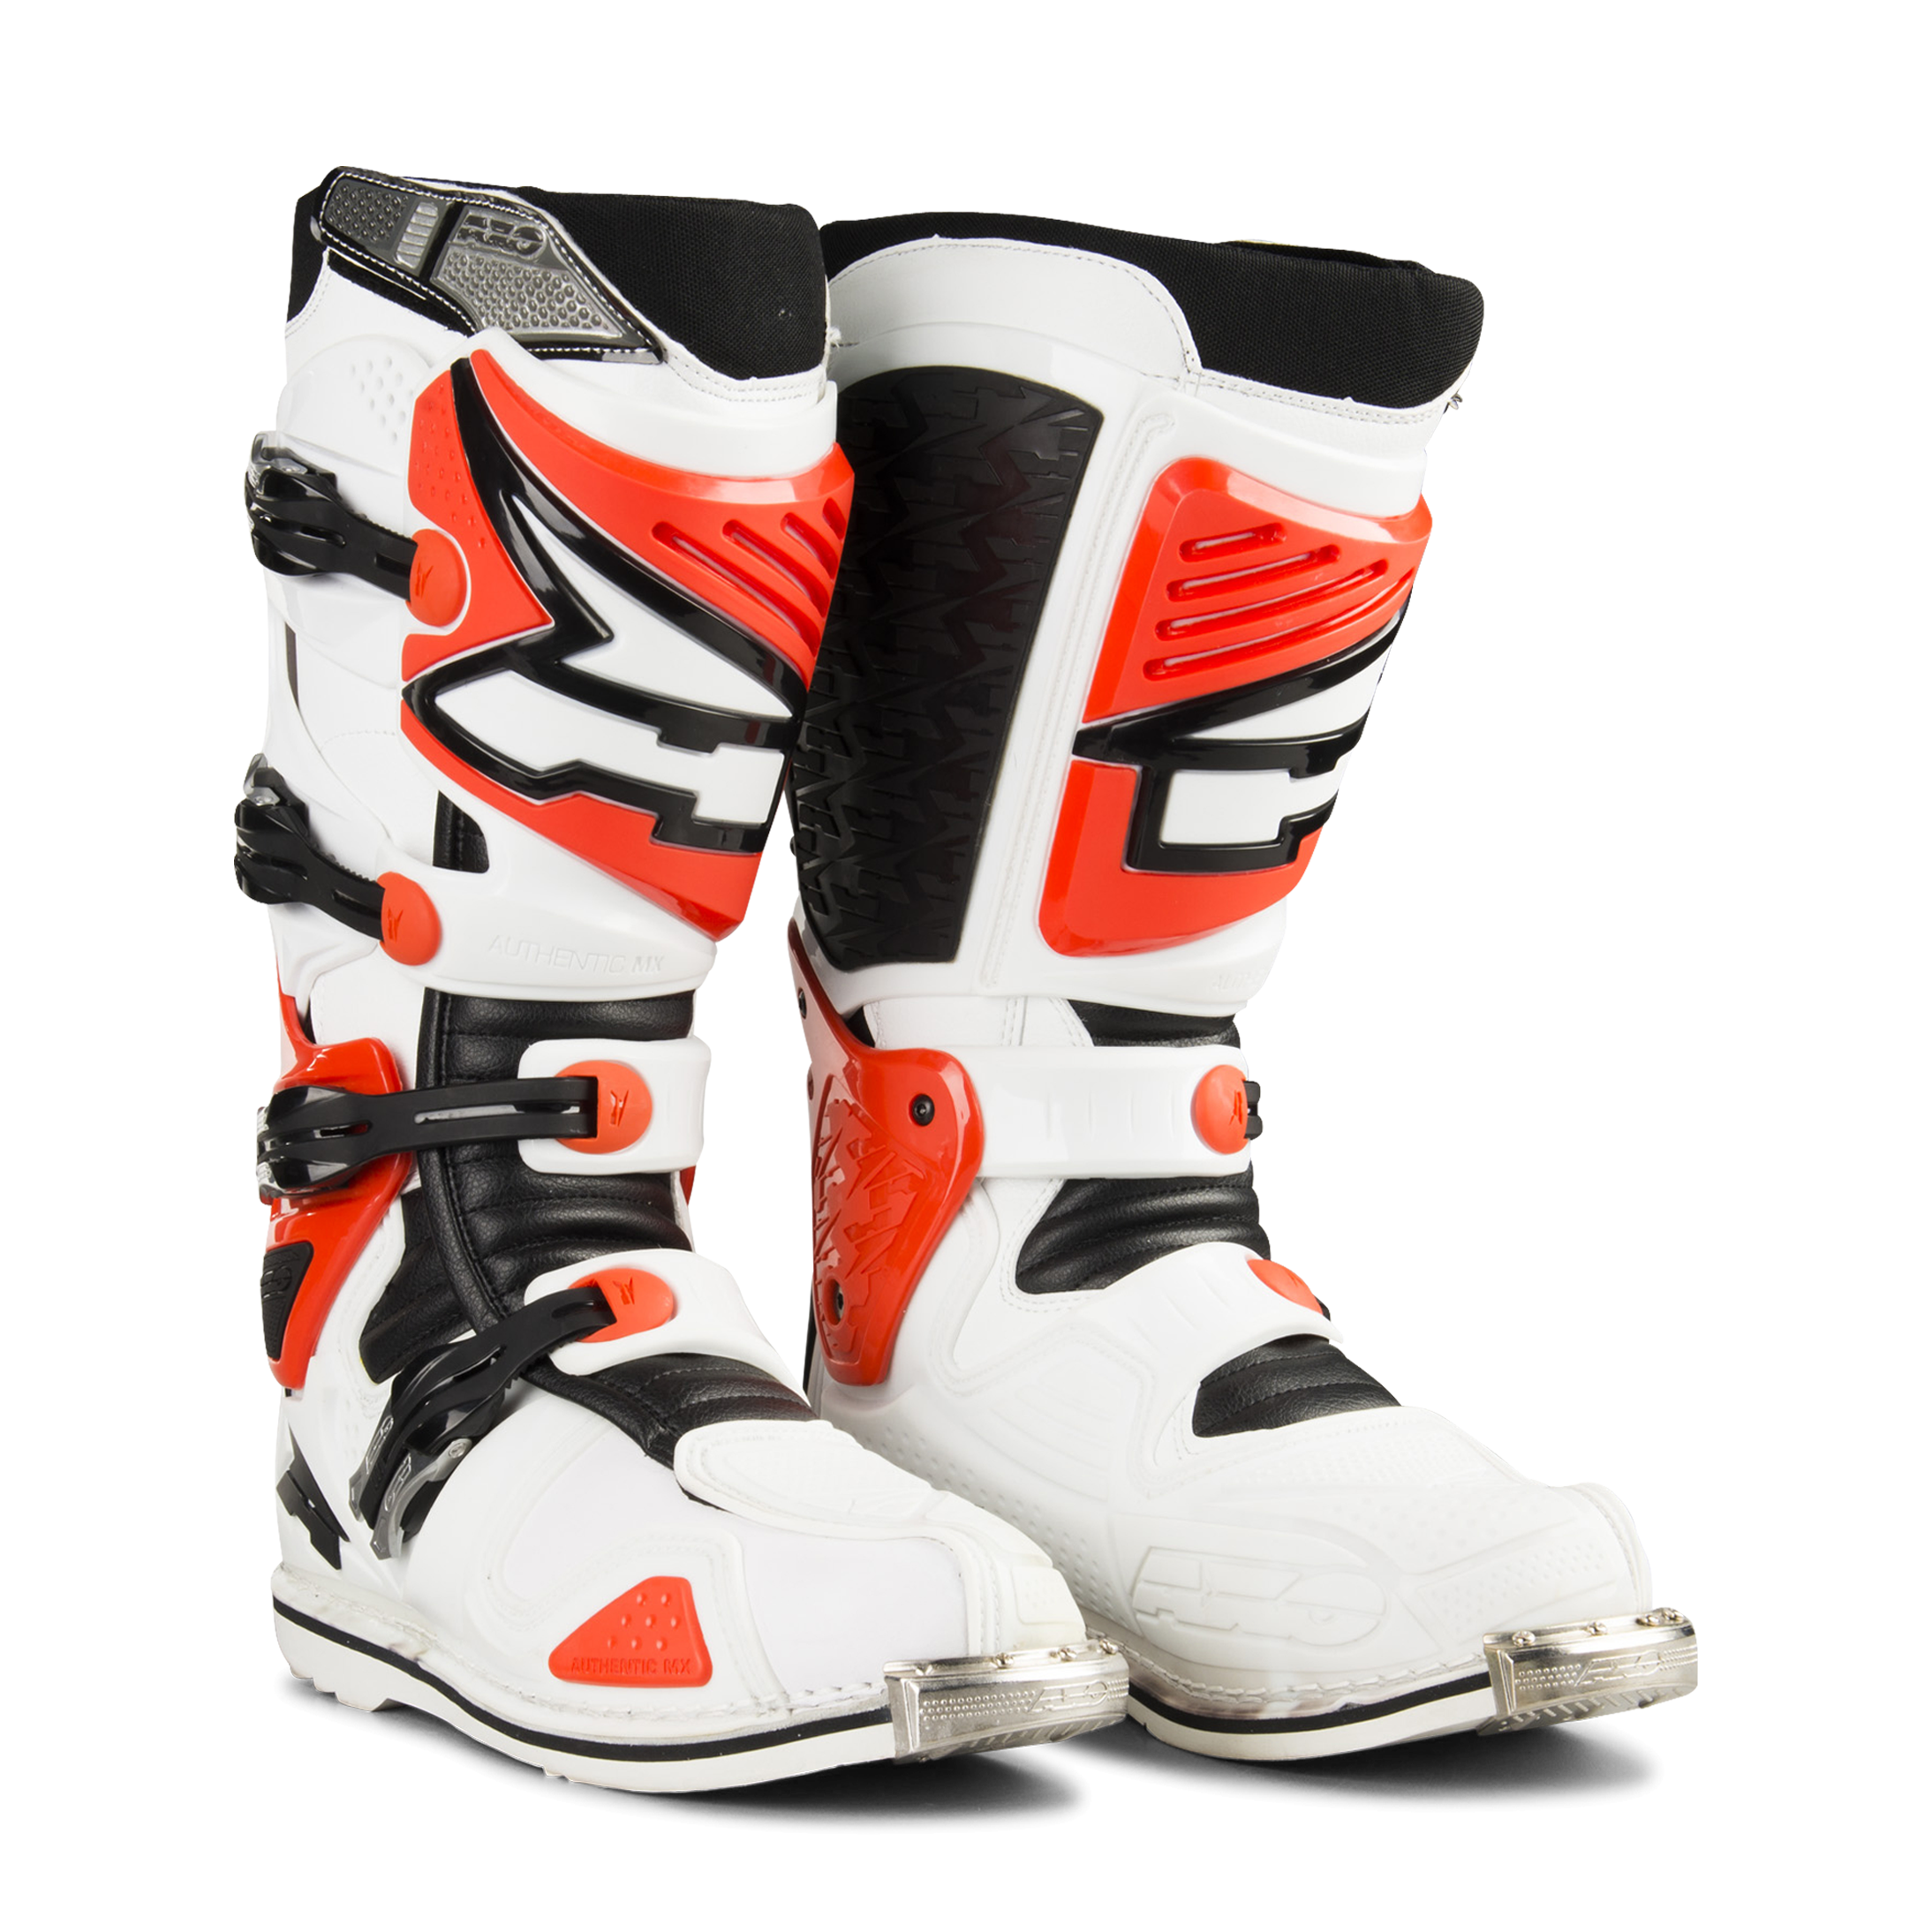 AXO A2 MX Boots White \u0026 Red - Now 50 